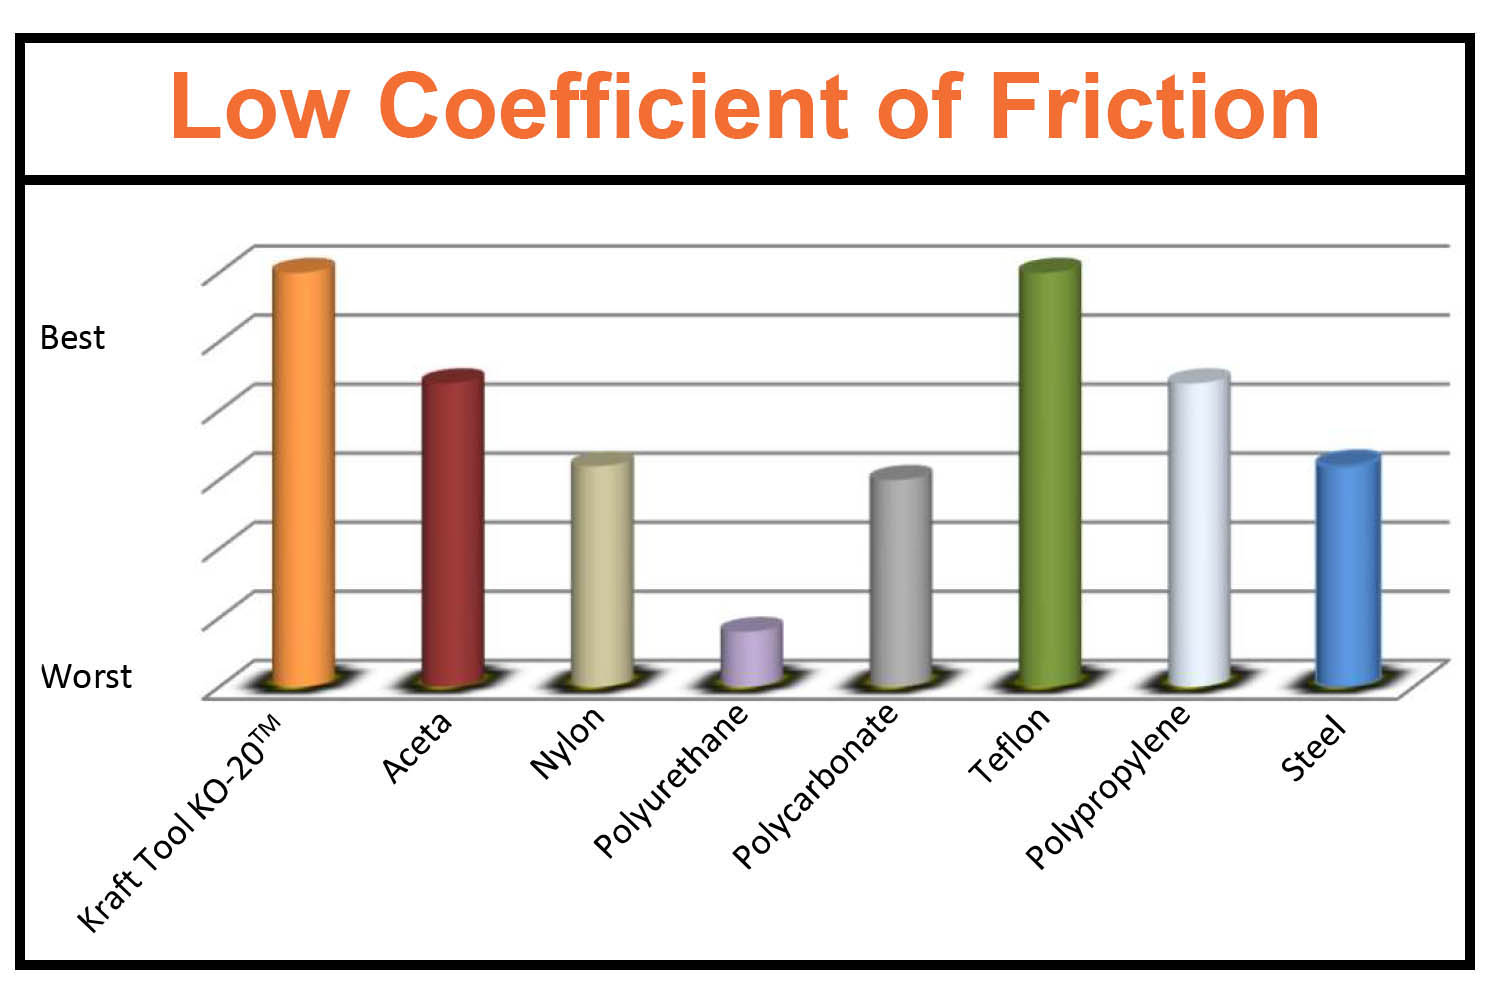 KO-20 has a low coefficient of friction